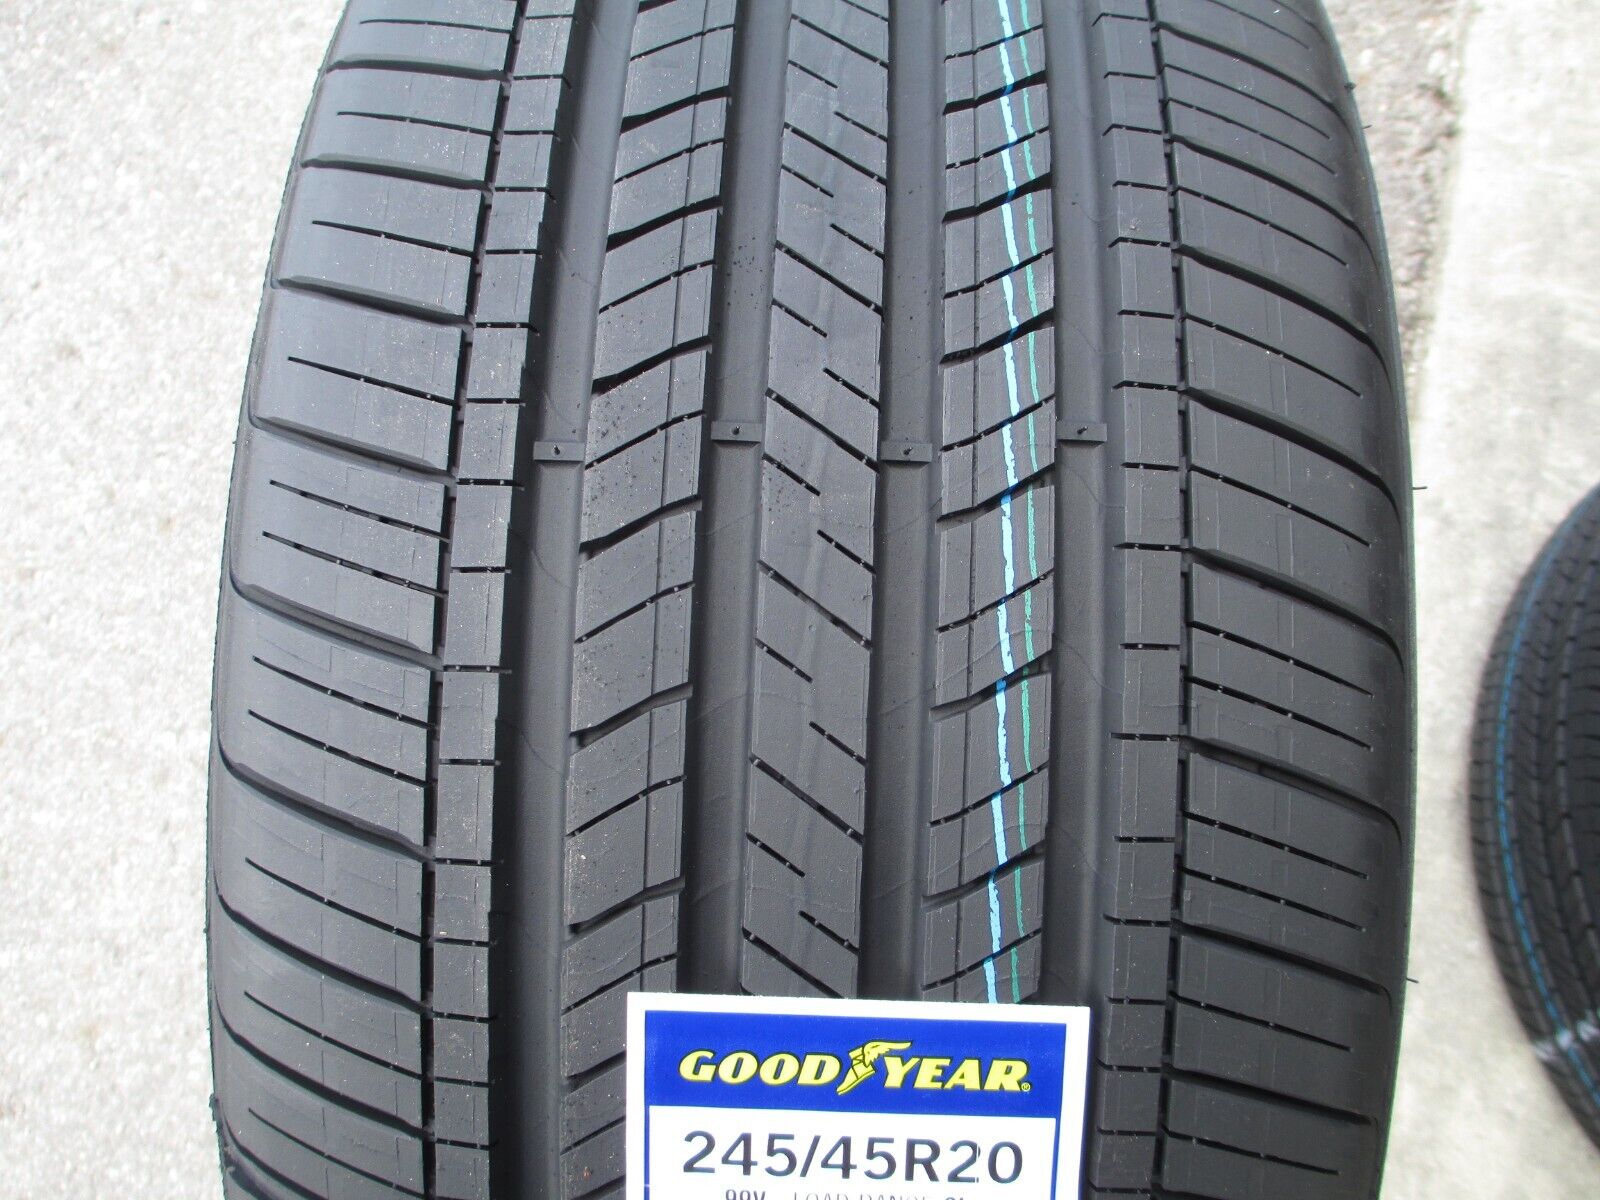 2 New 245/45R20 Goodyear Eagle Touring Tires 2454520 45 20 R20 45R 500AA